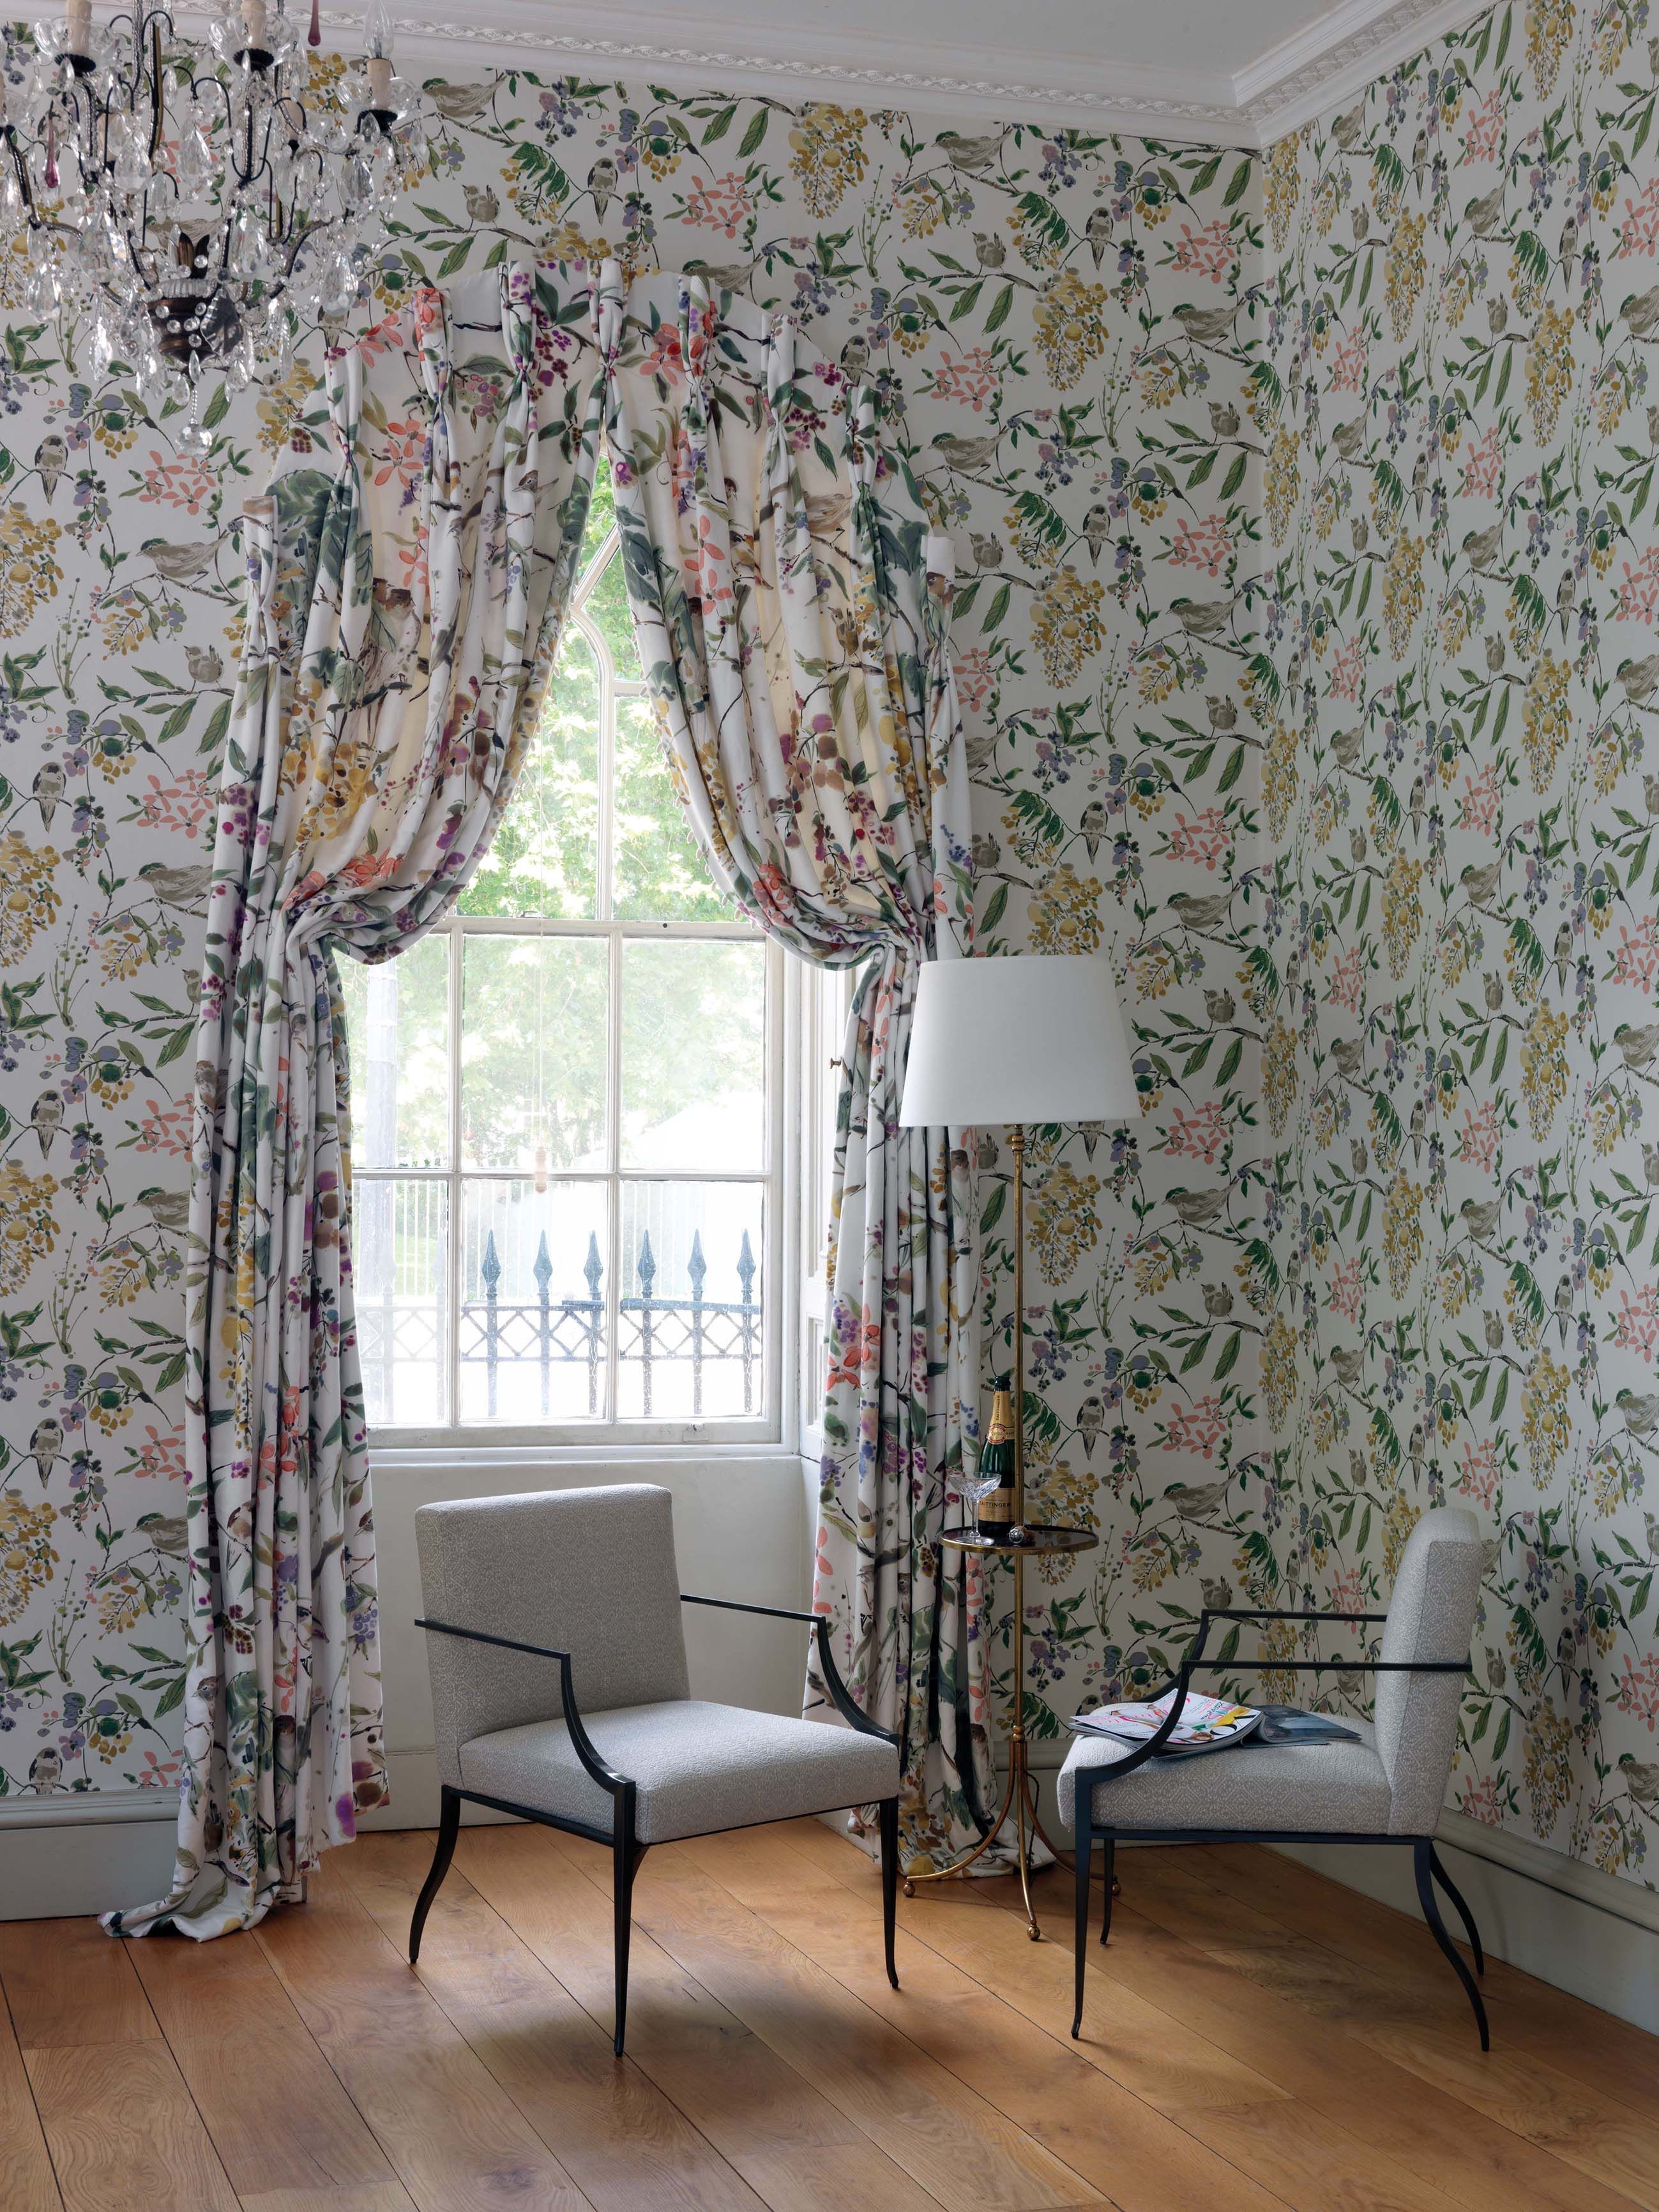 Where Does The Wall End And Curtains Begin Matching - Nina Campbell Penglai Fabric - HD Wallpaper 